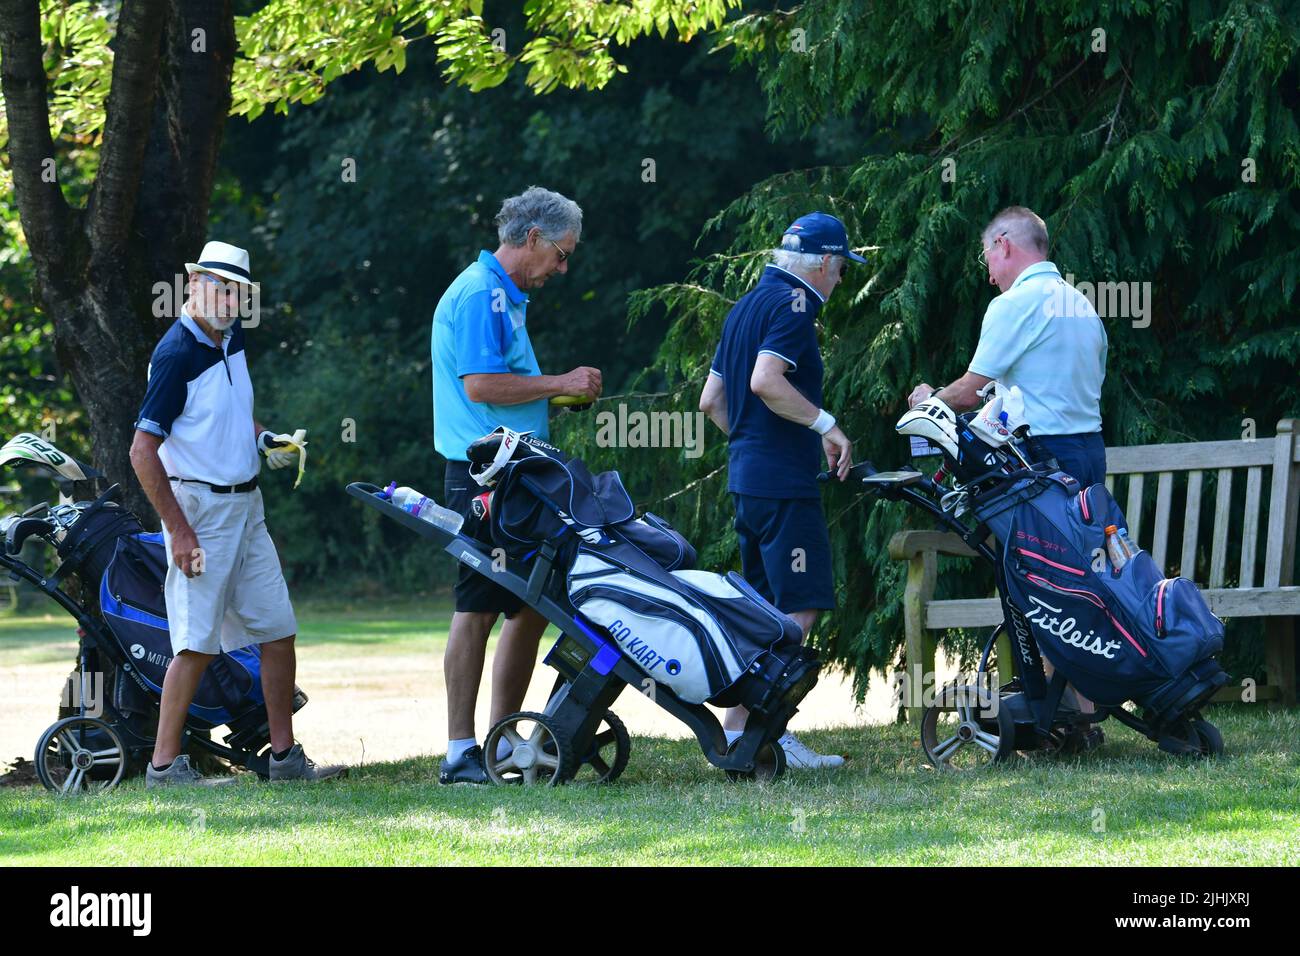 Hottest Day at Midday with breaking temperatures Senior golfers taking part in Competition from Long Ashton Golf Club seen at the Half Way house .Picture Credit: Robert Timoney/Alamy Live News Stock Photo